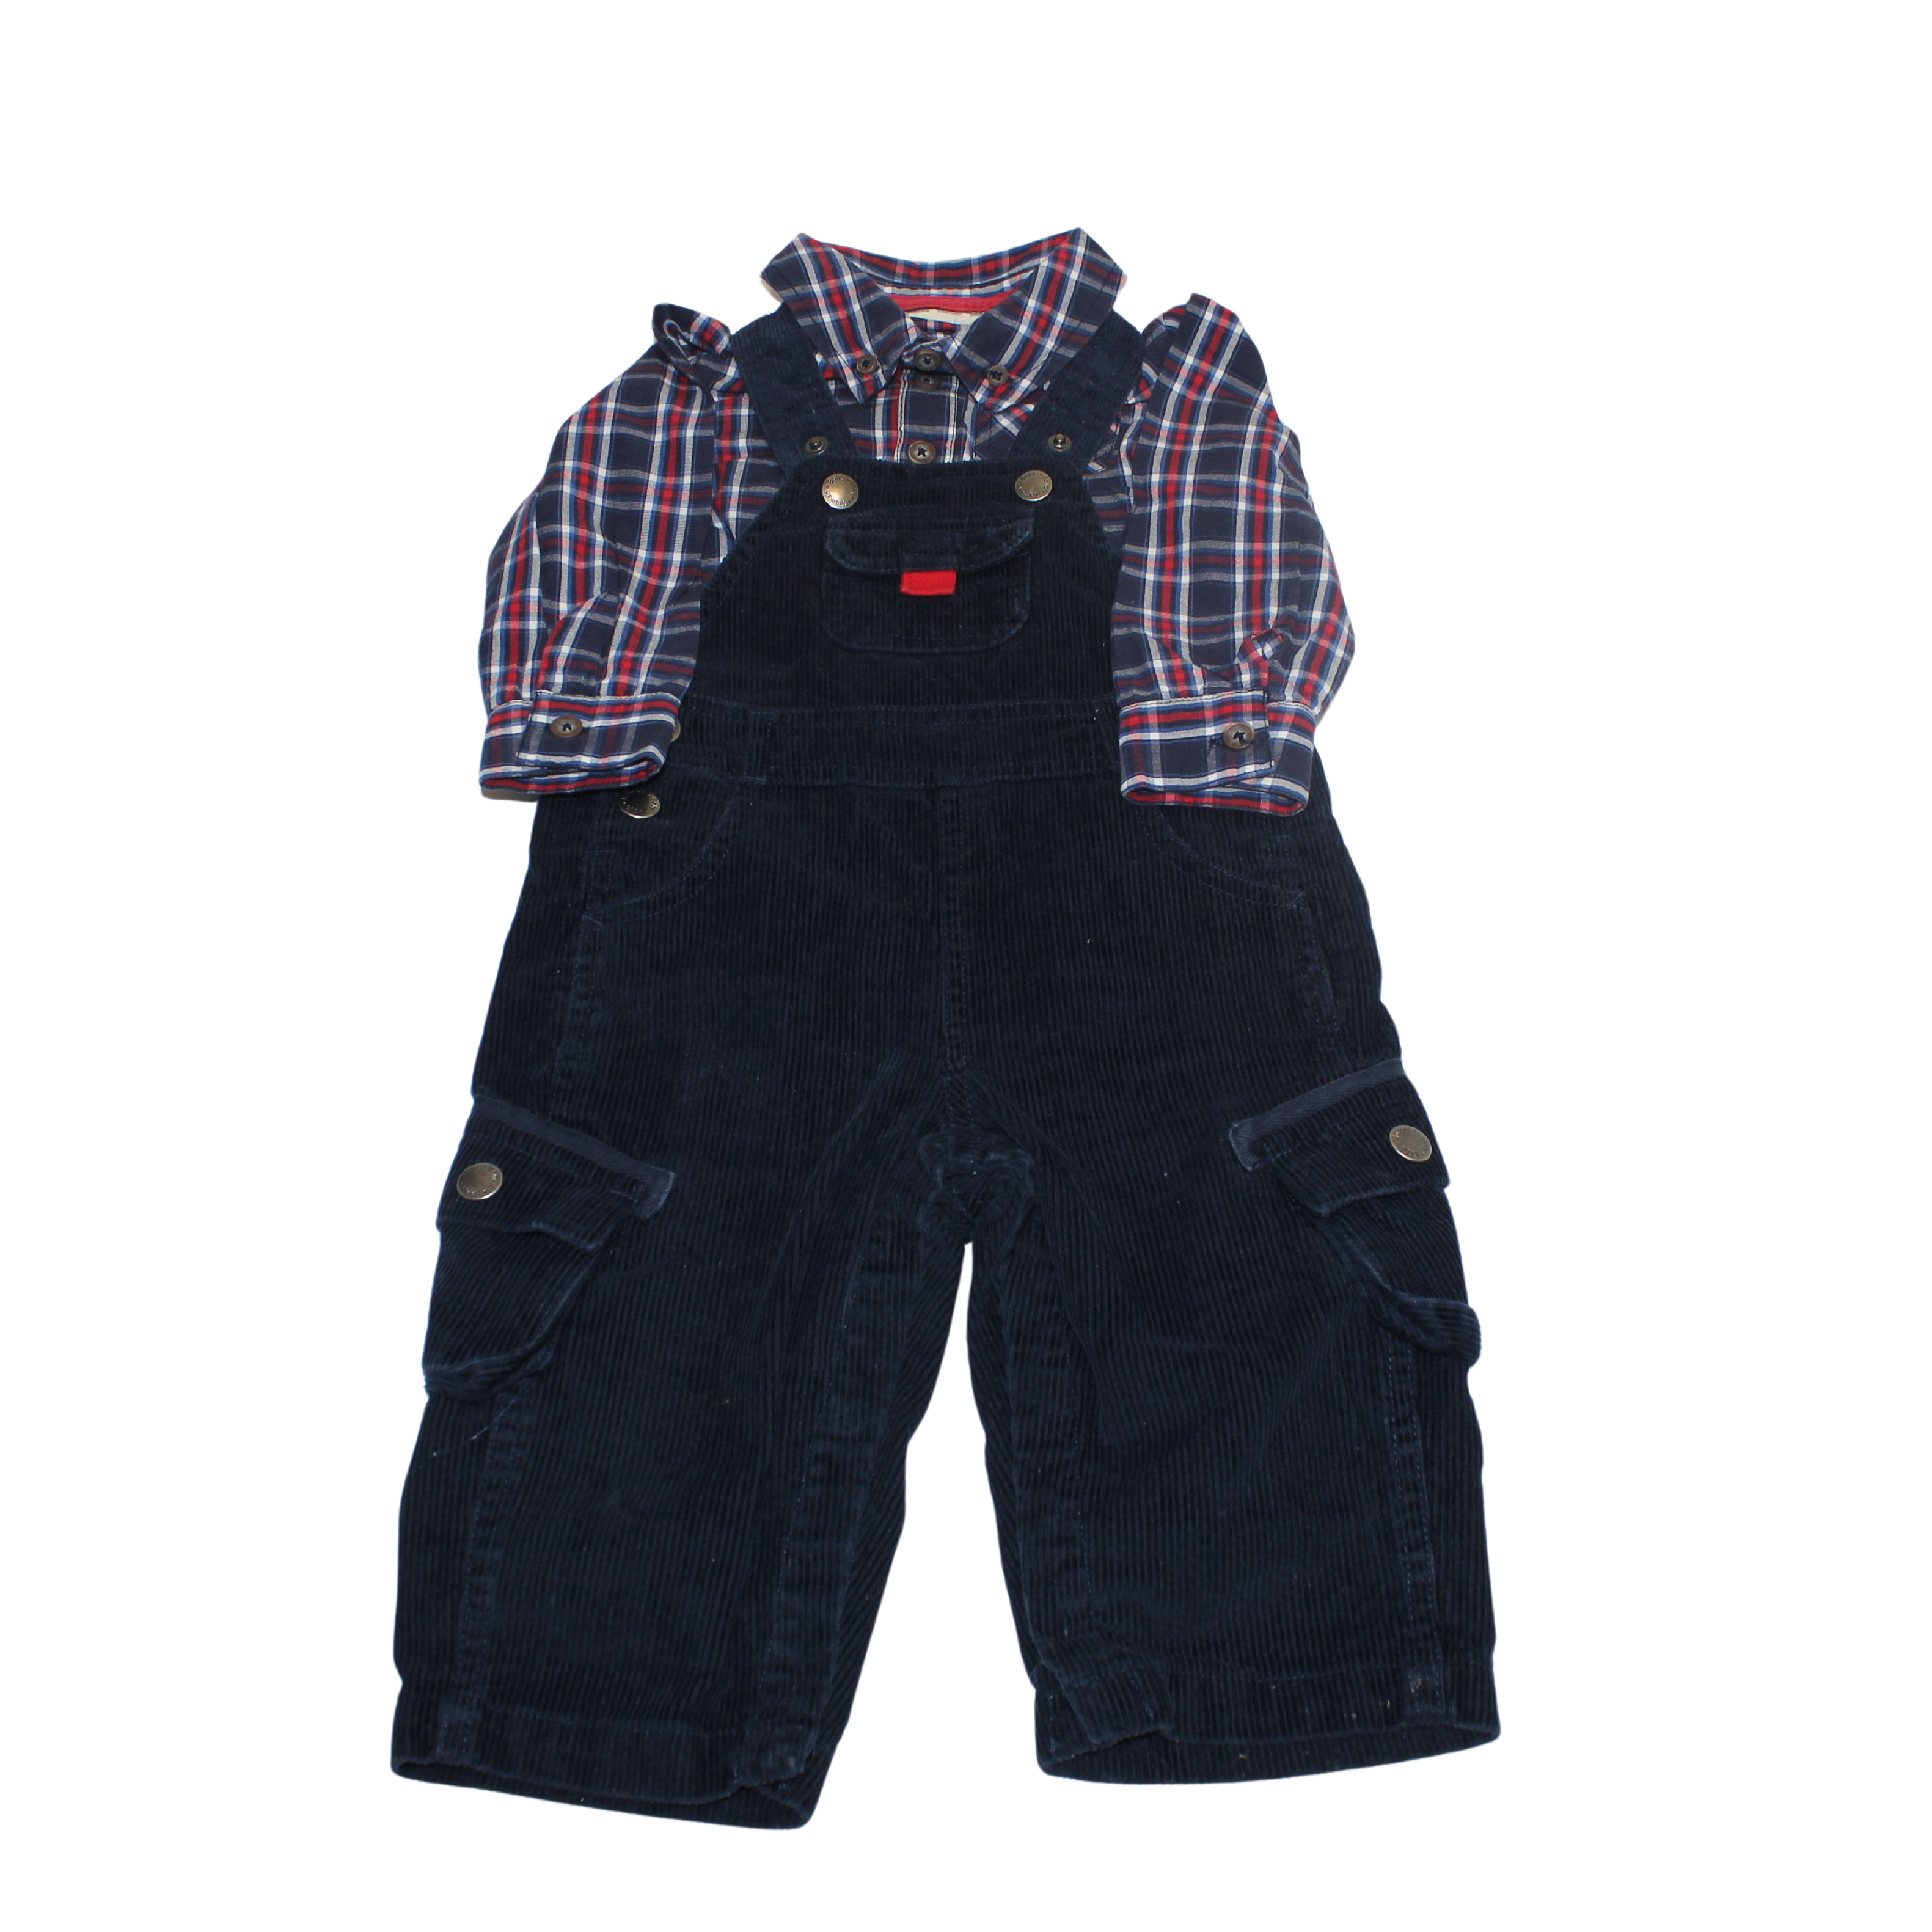 Classic Cord Dungarees and Check Shirt